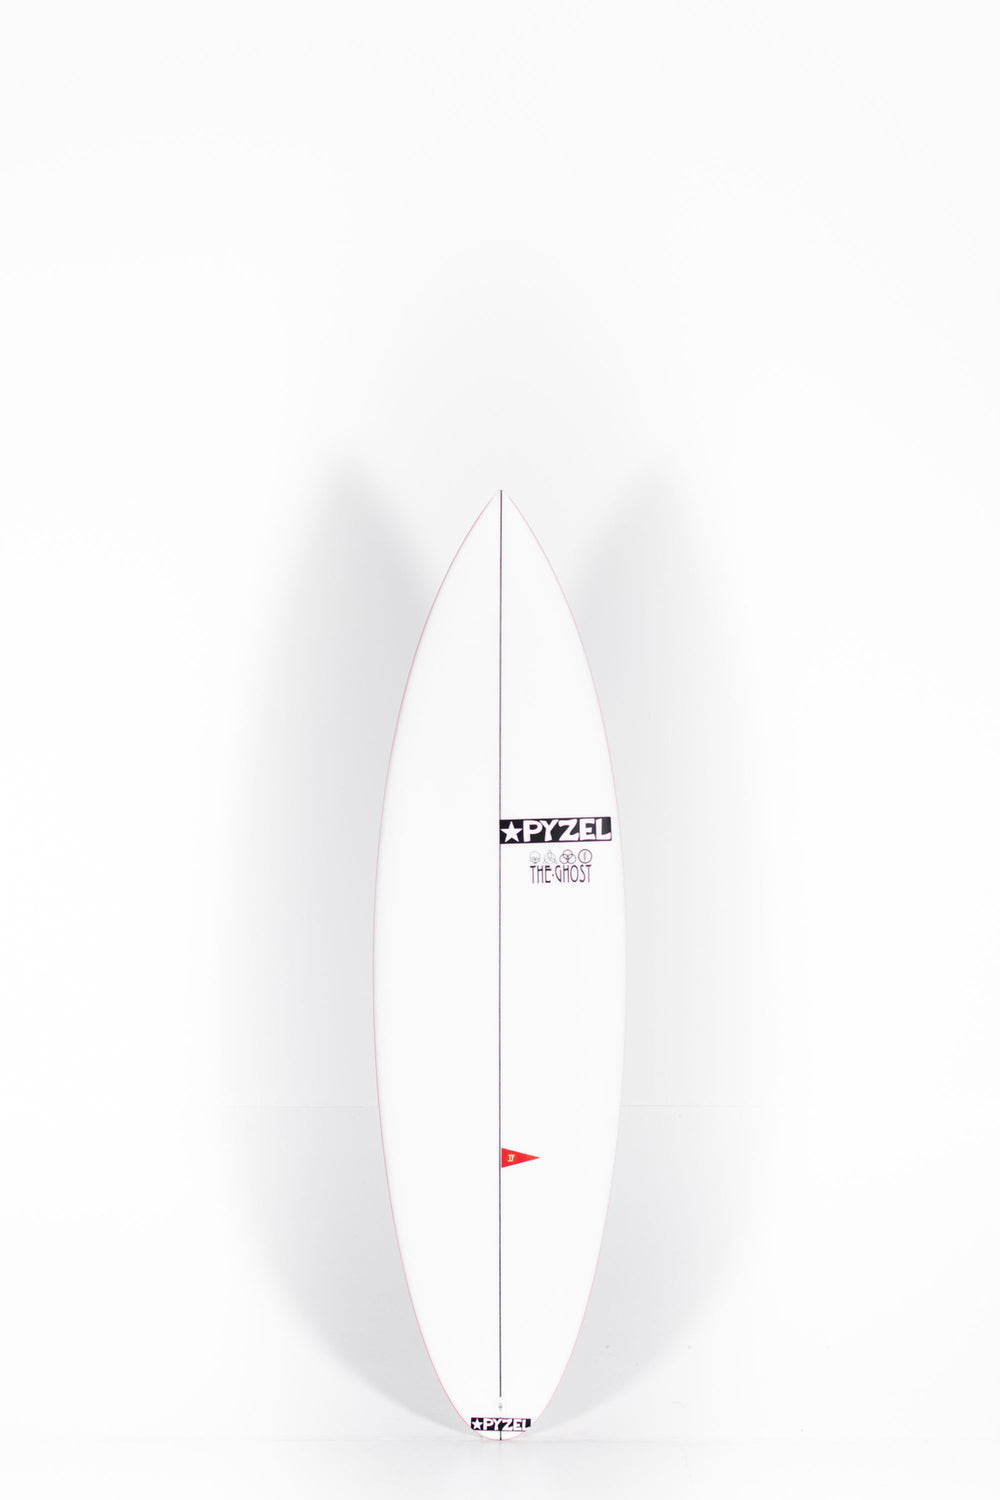 Pukas Surf Shop - Pyzel Surfboards - GHOST - 6'0